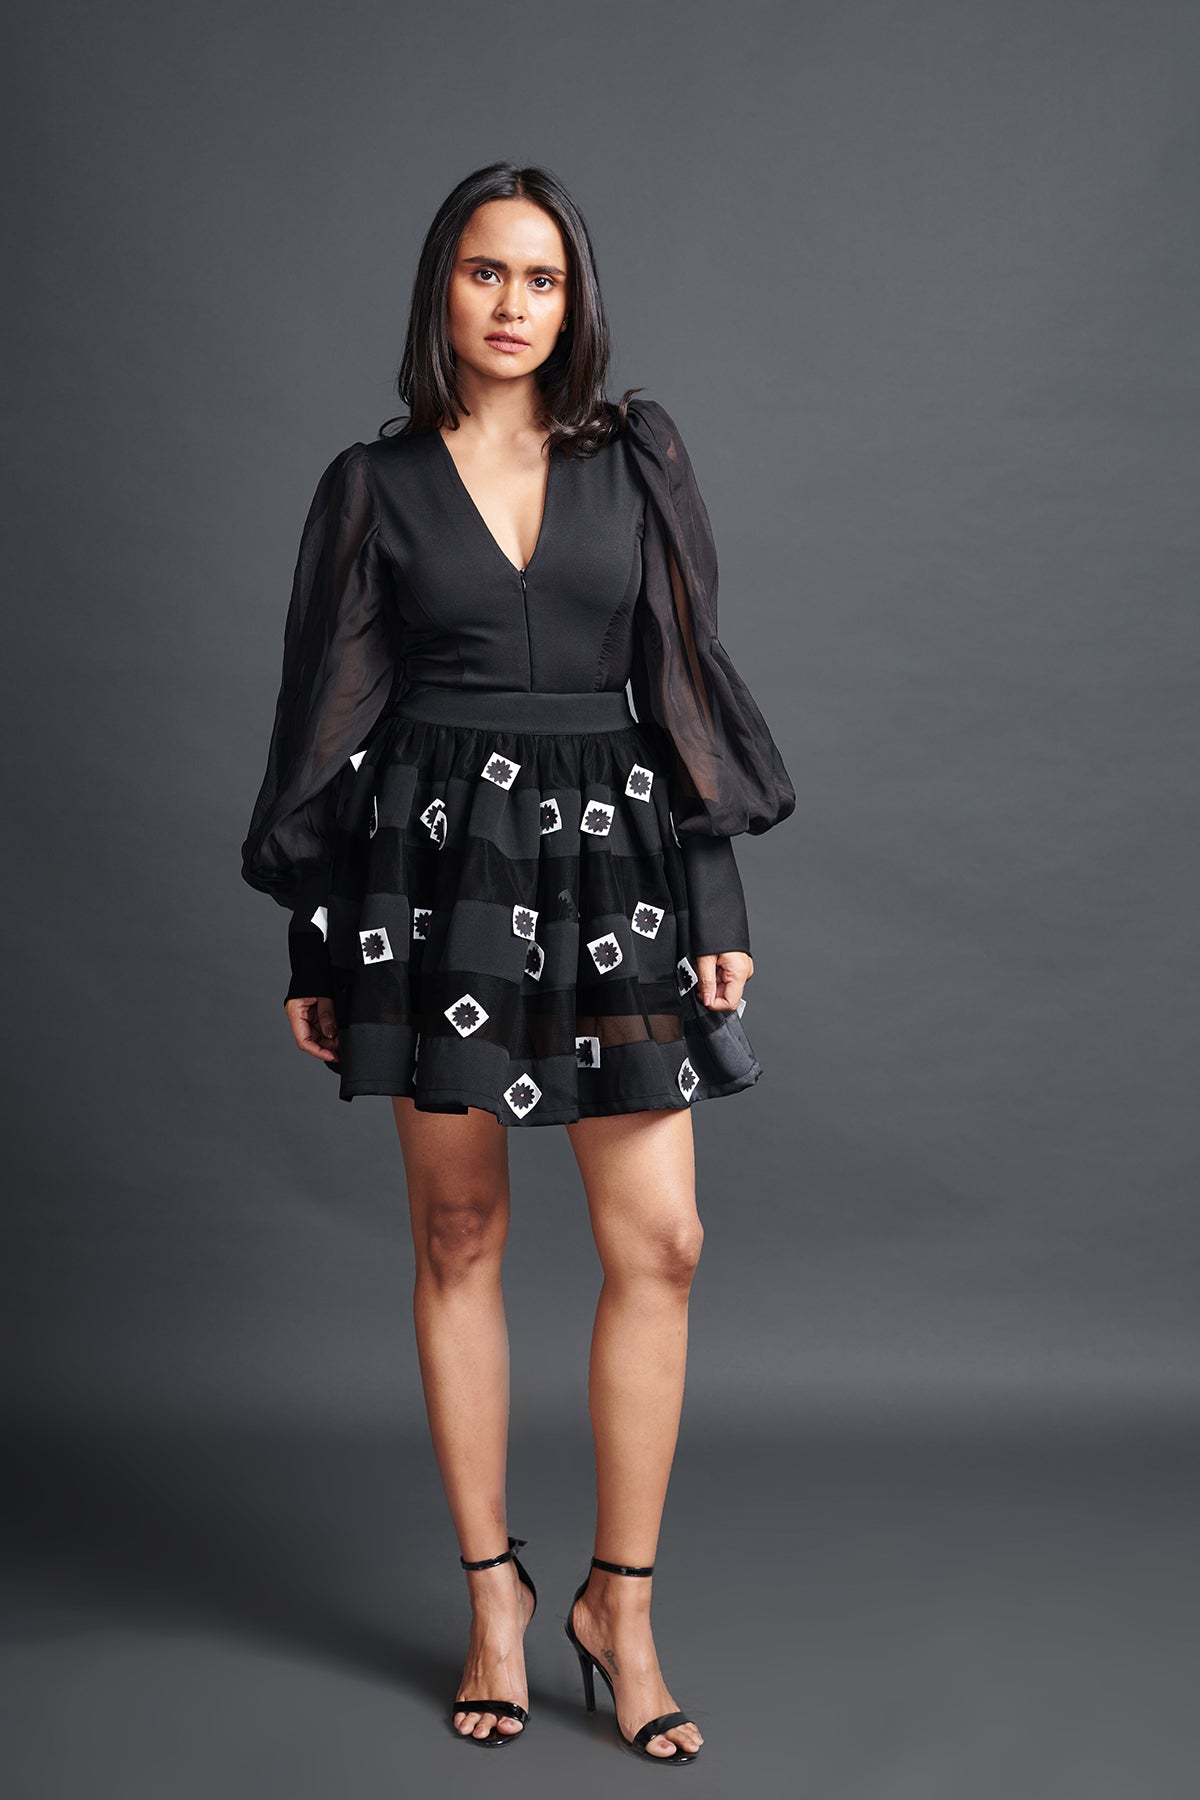 Image of BLACK ORGANZA CO-ORD SHORT SKIRT SET WITH CONFETTI ON SKIRT. From savoirfashions.com